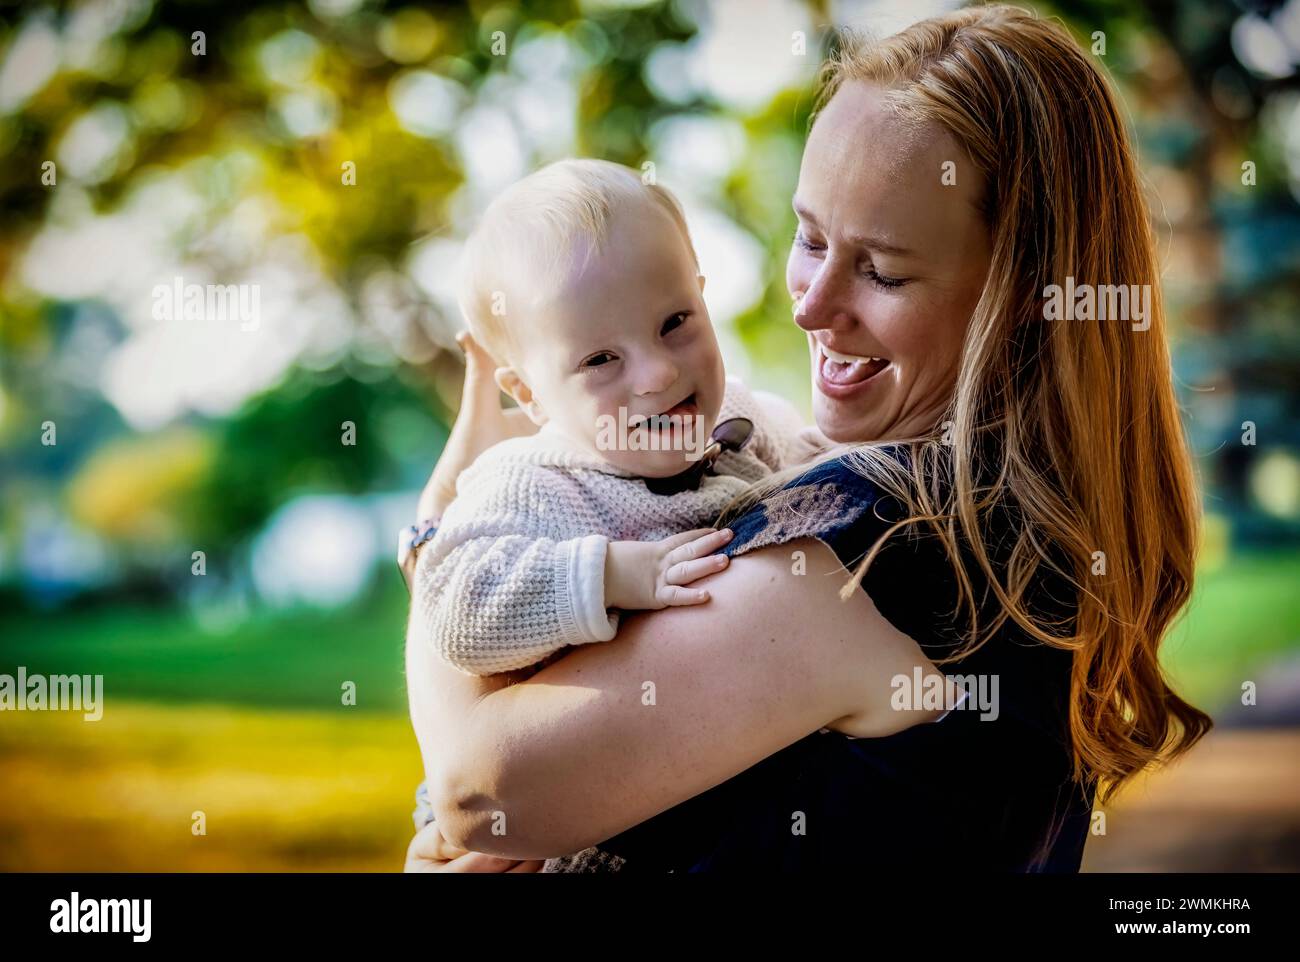 Outdoor portrait of a mother spending quality time with her son who has Down Syndrome in a city park during an autumn day; Leduc, Alberta, Canada Stock Photo